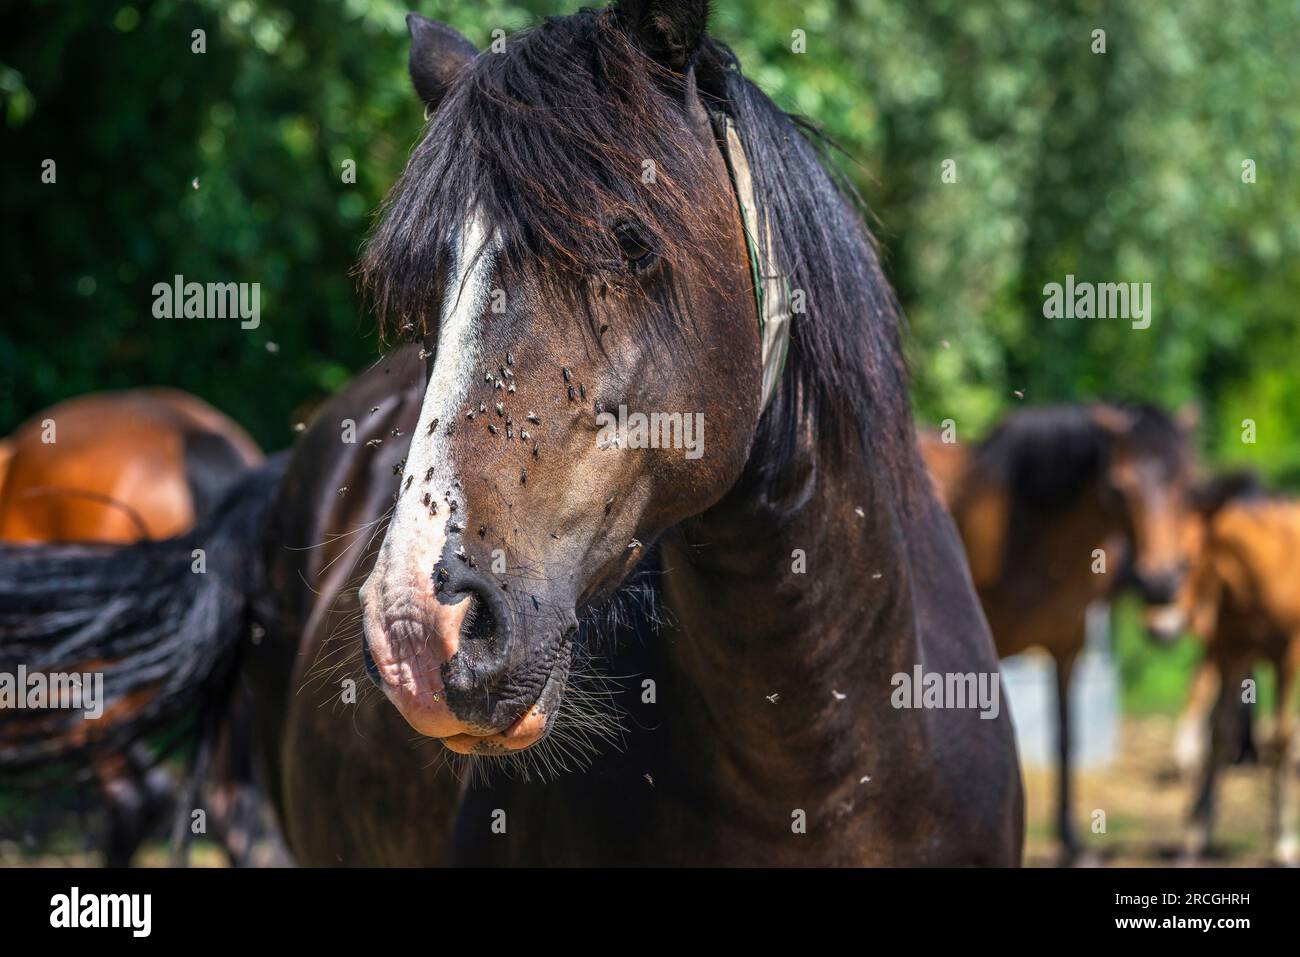 A horse (Equus ferus caballus) surrounded by pesky house flies during warm summer weather Stock Photo